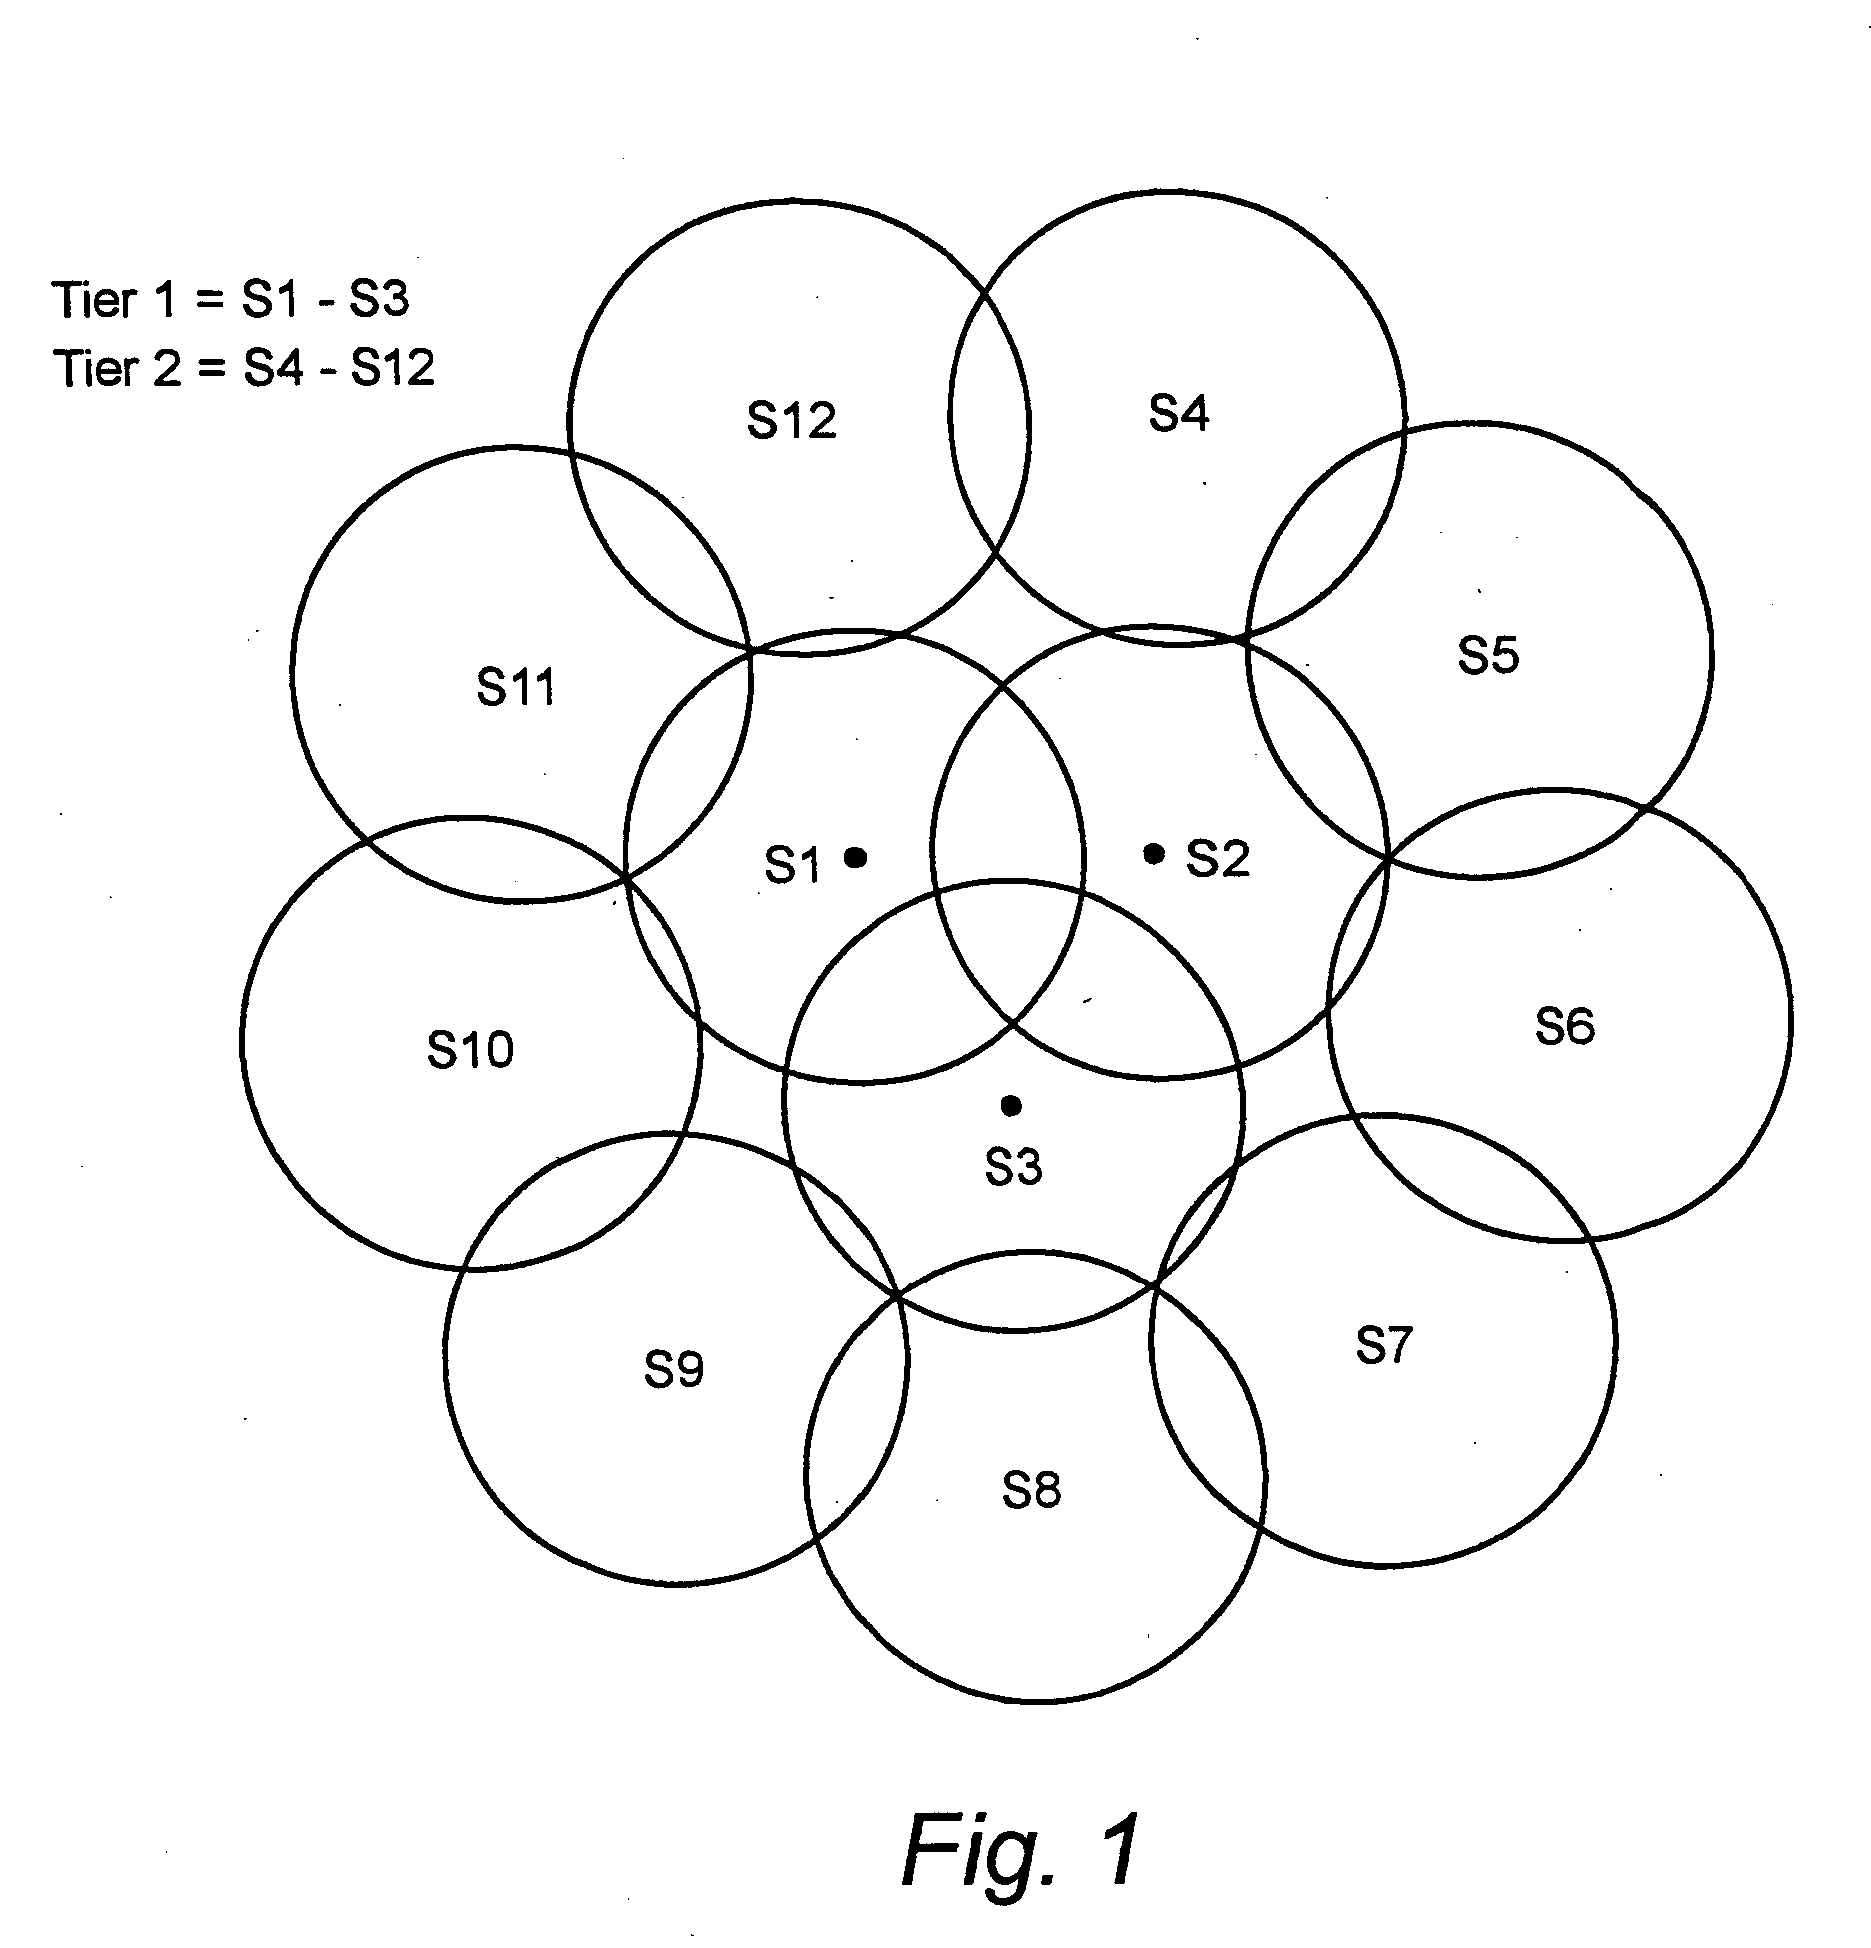 Method and apparatus for testing a radio network